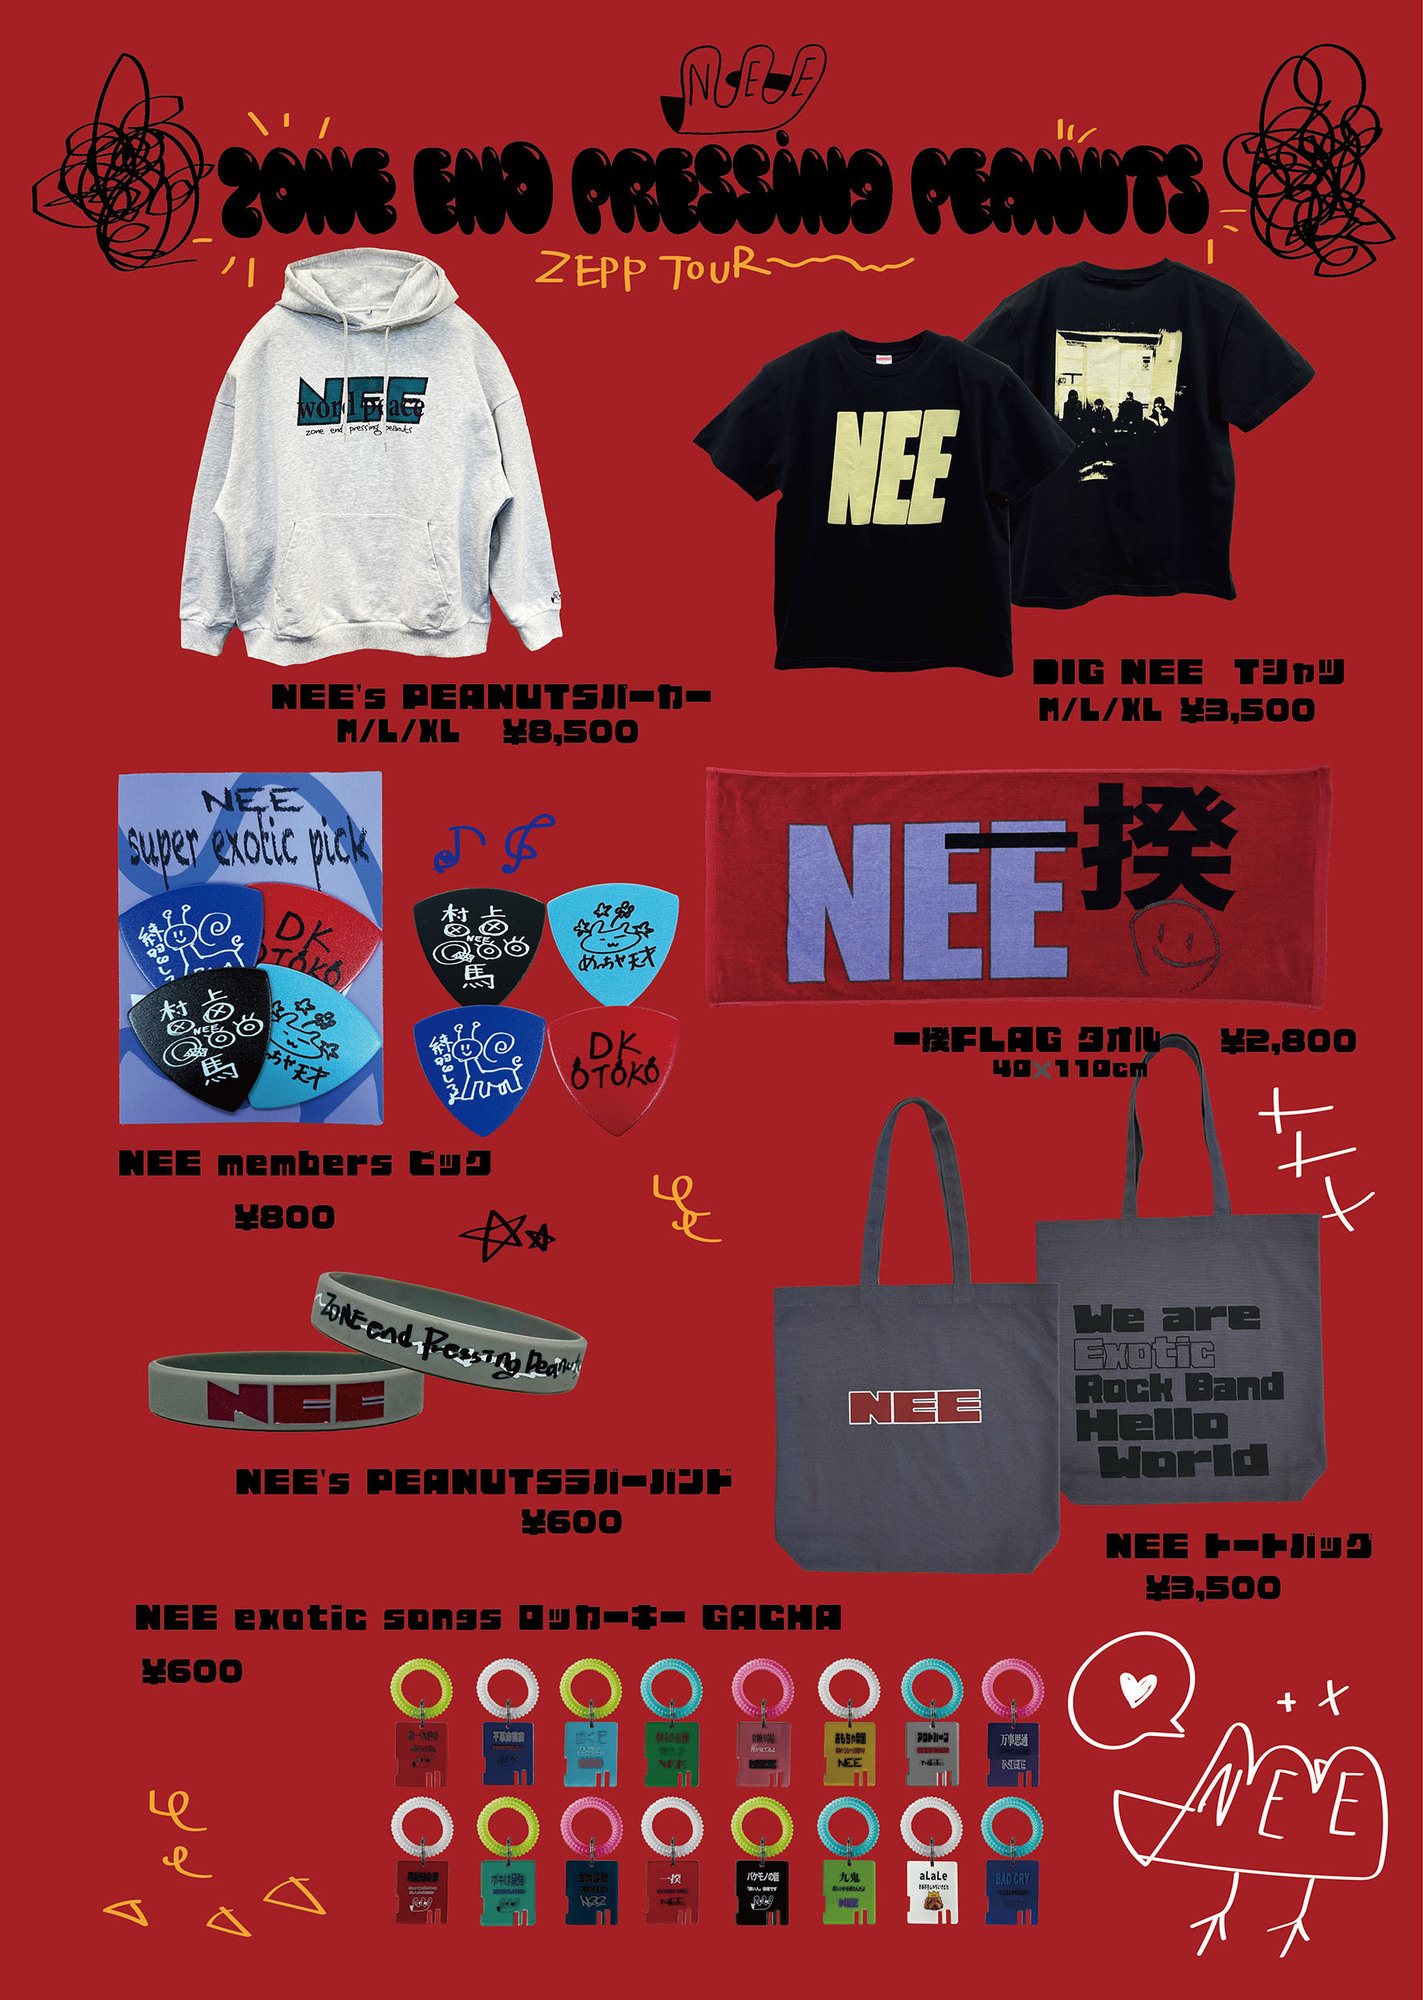 NEE 7th TOUR「Zone End Pressing Peanuts」新グッズ解禁！会場